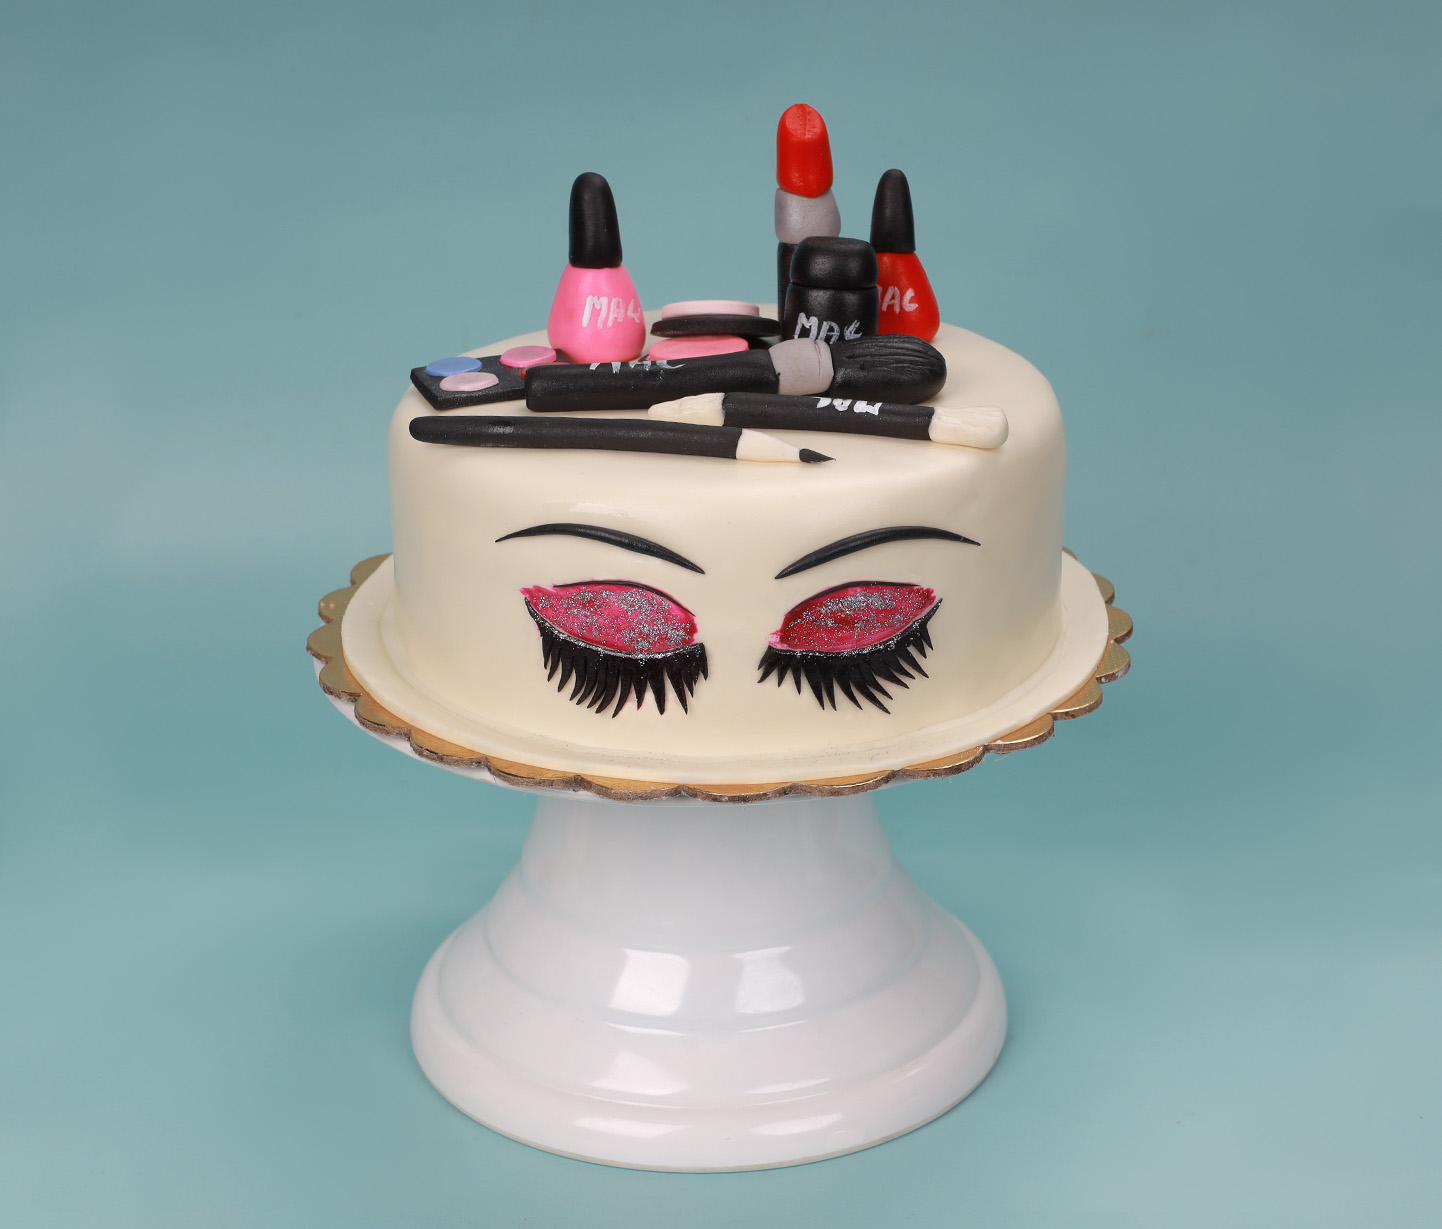 Incredible Collection of Makeup Cake Images - Over 999+ Stunning 4K ...